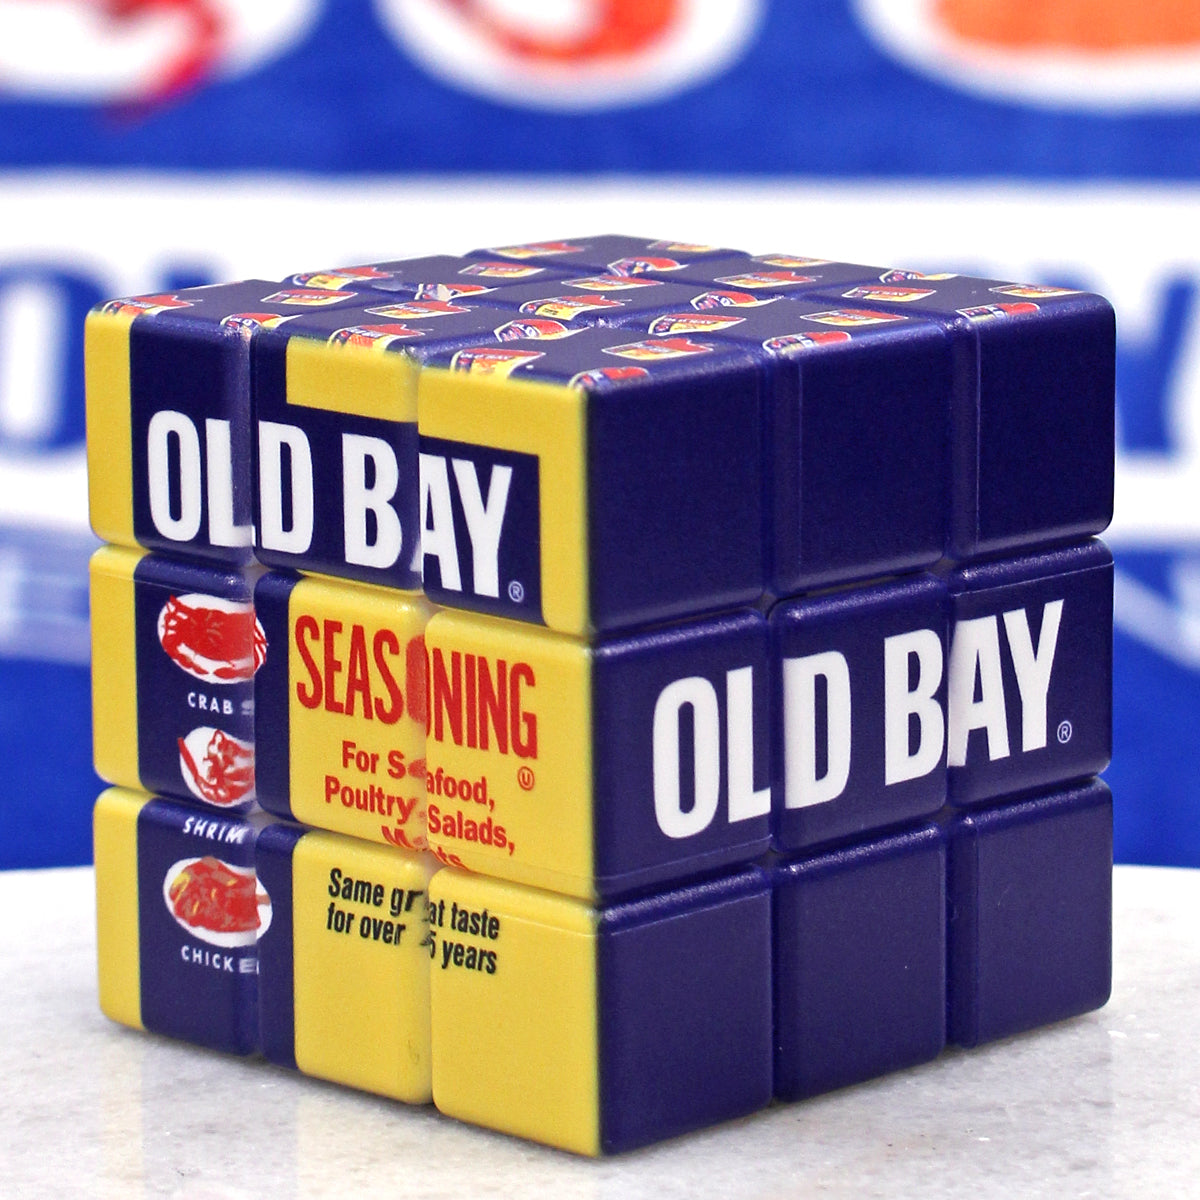 OLD BAY / 3D Cube Puzzle - Route One Apparel